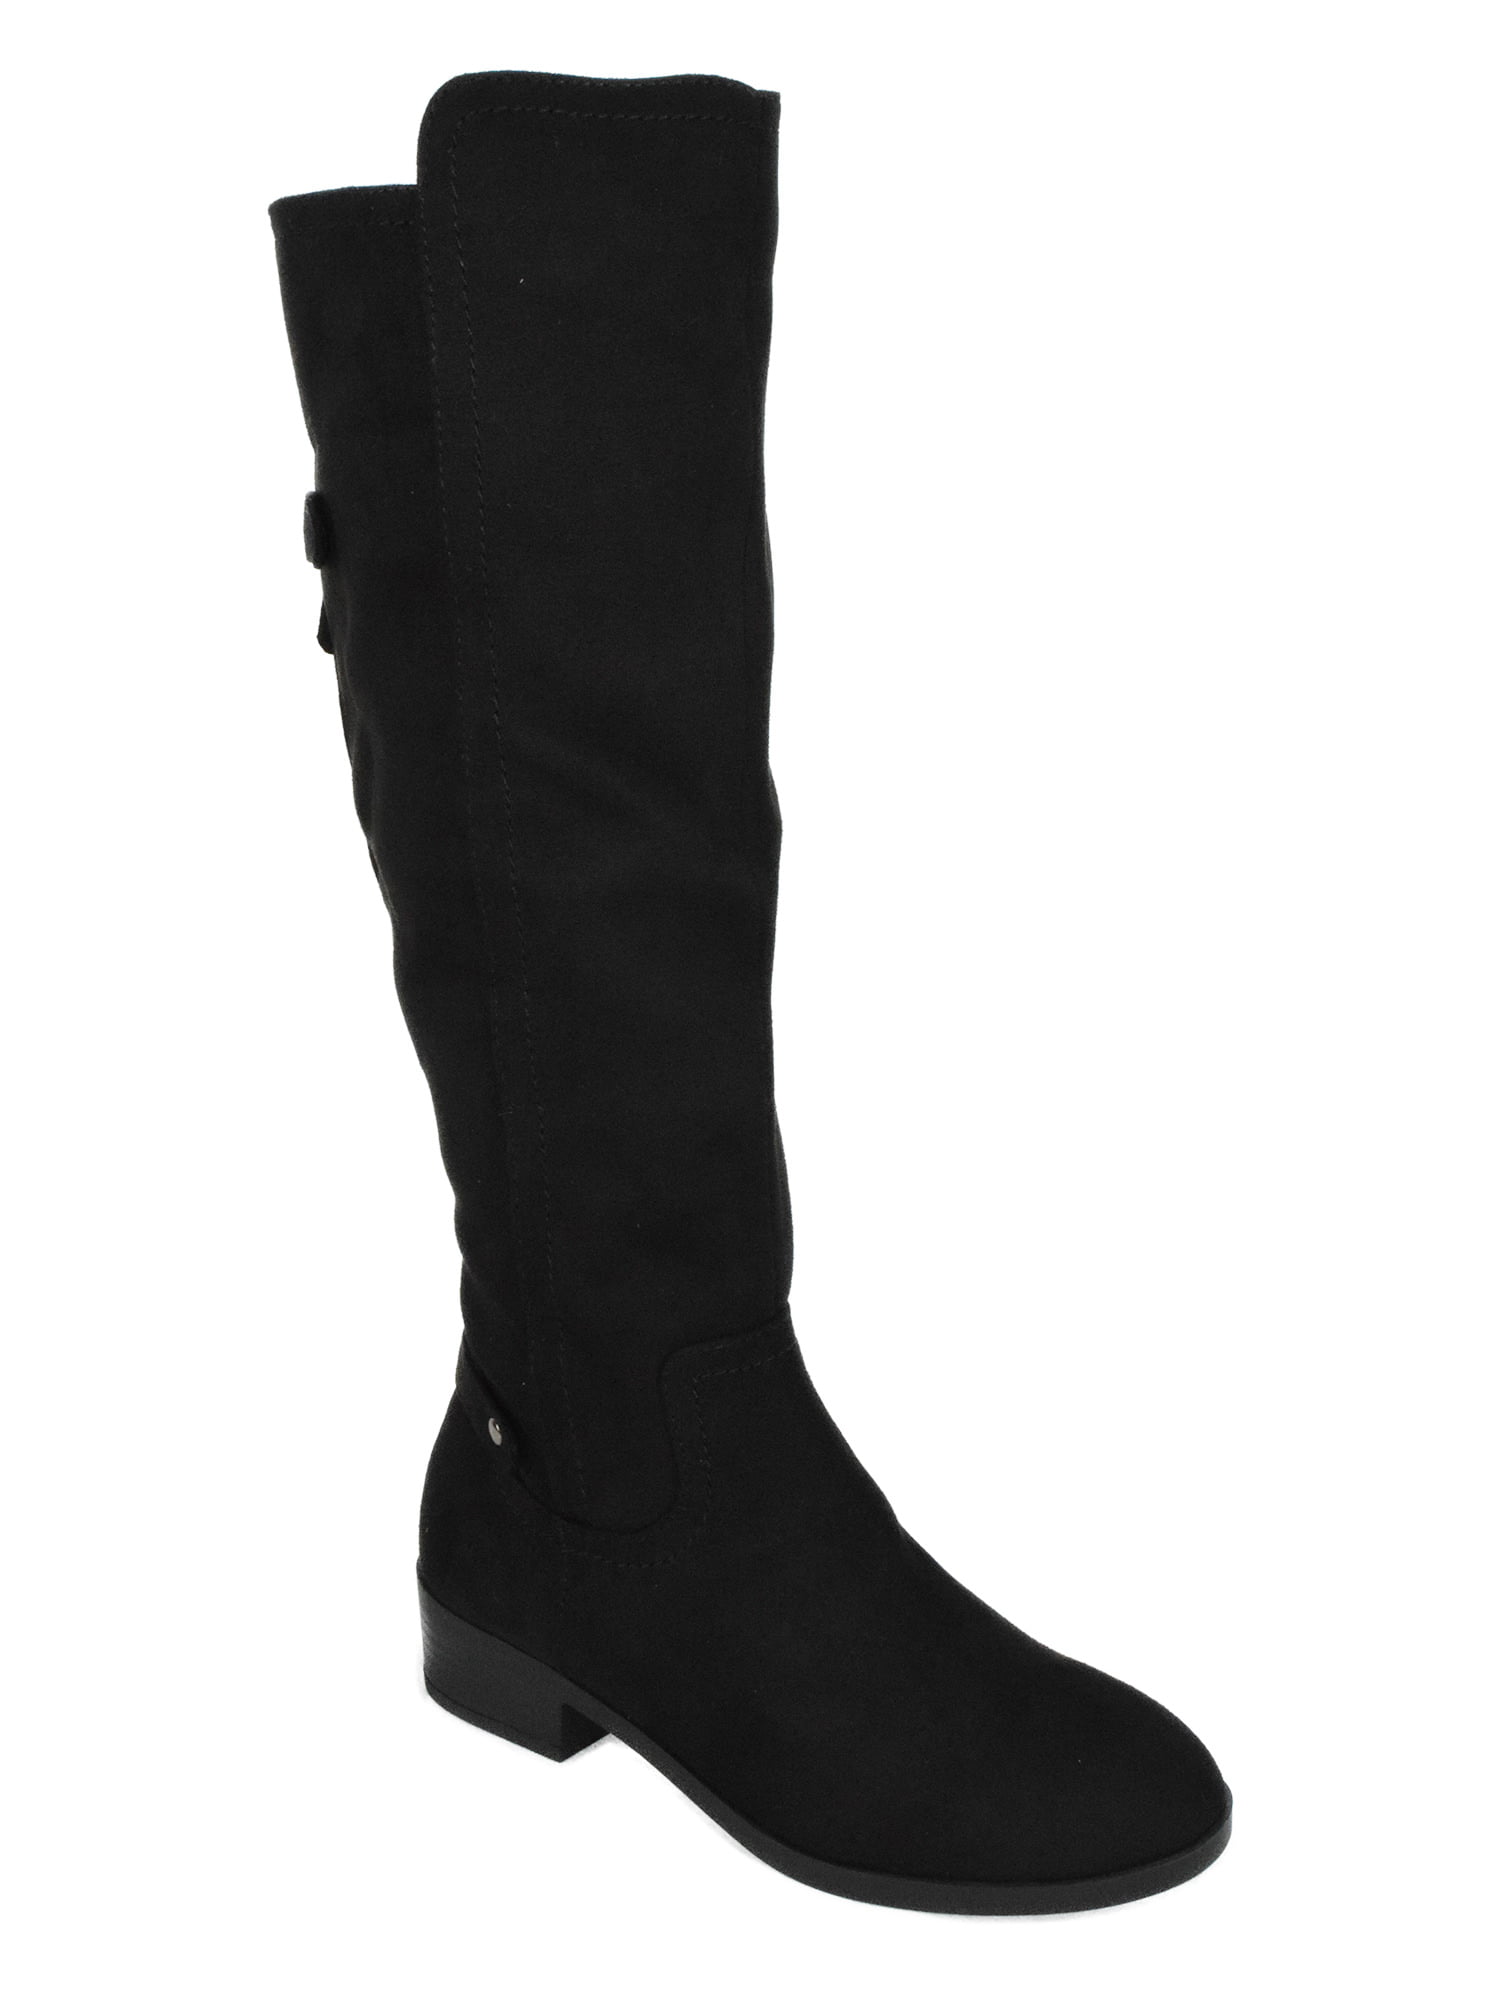 black suede boots womens knee high